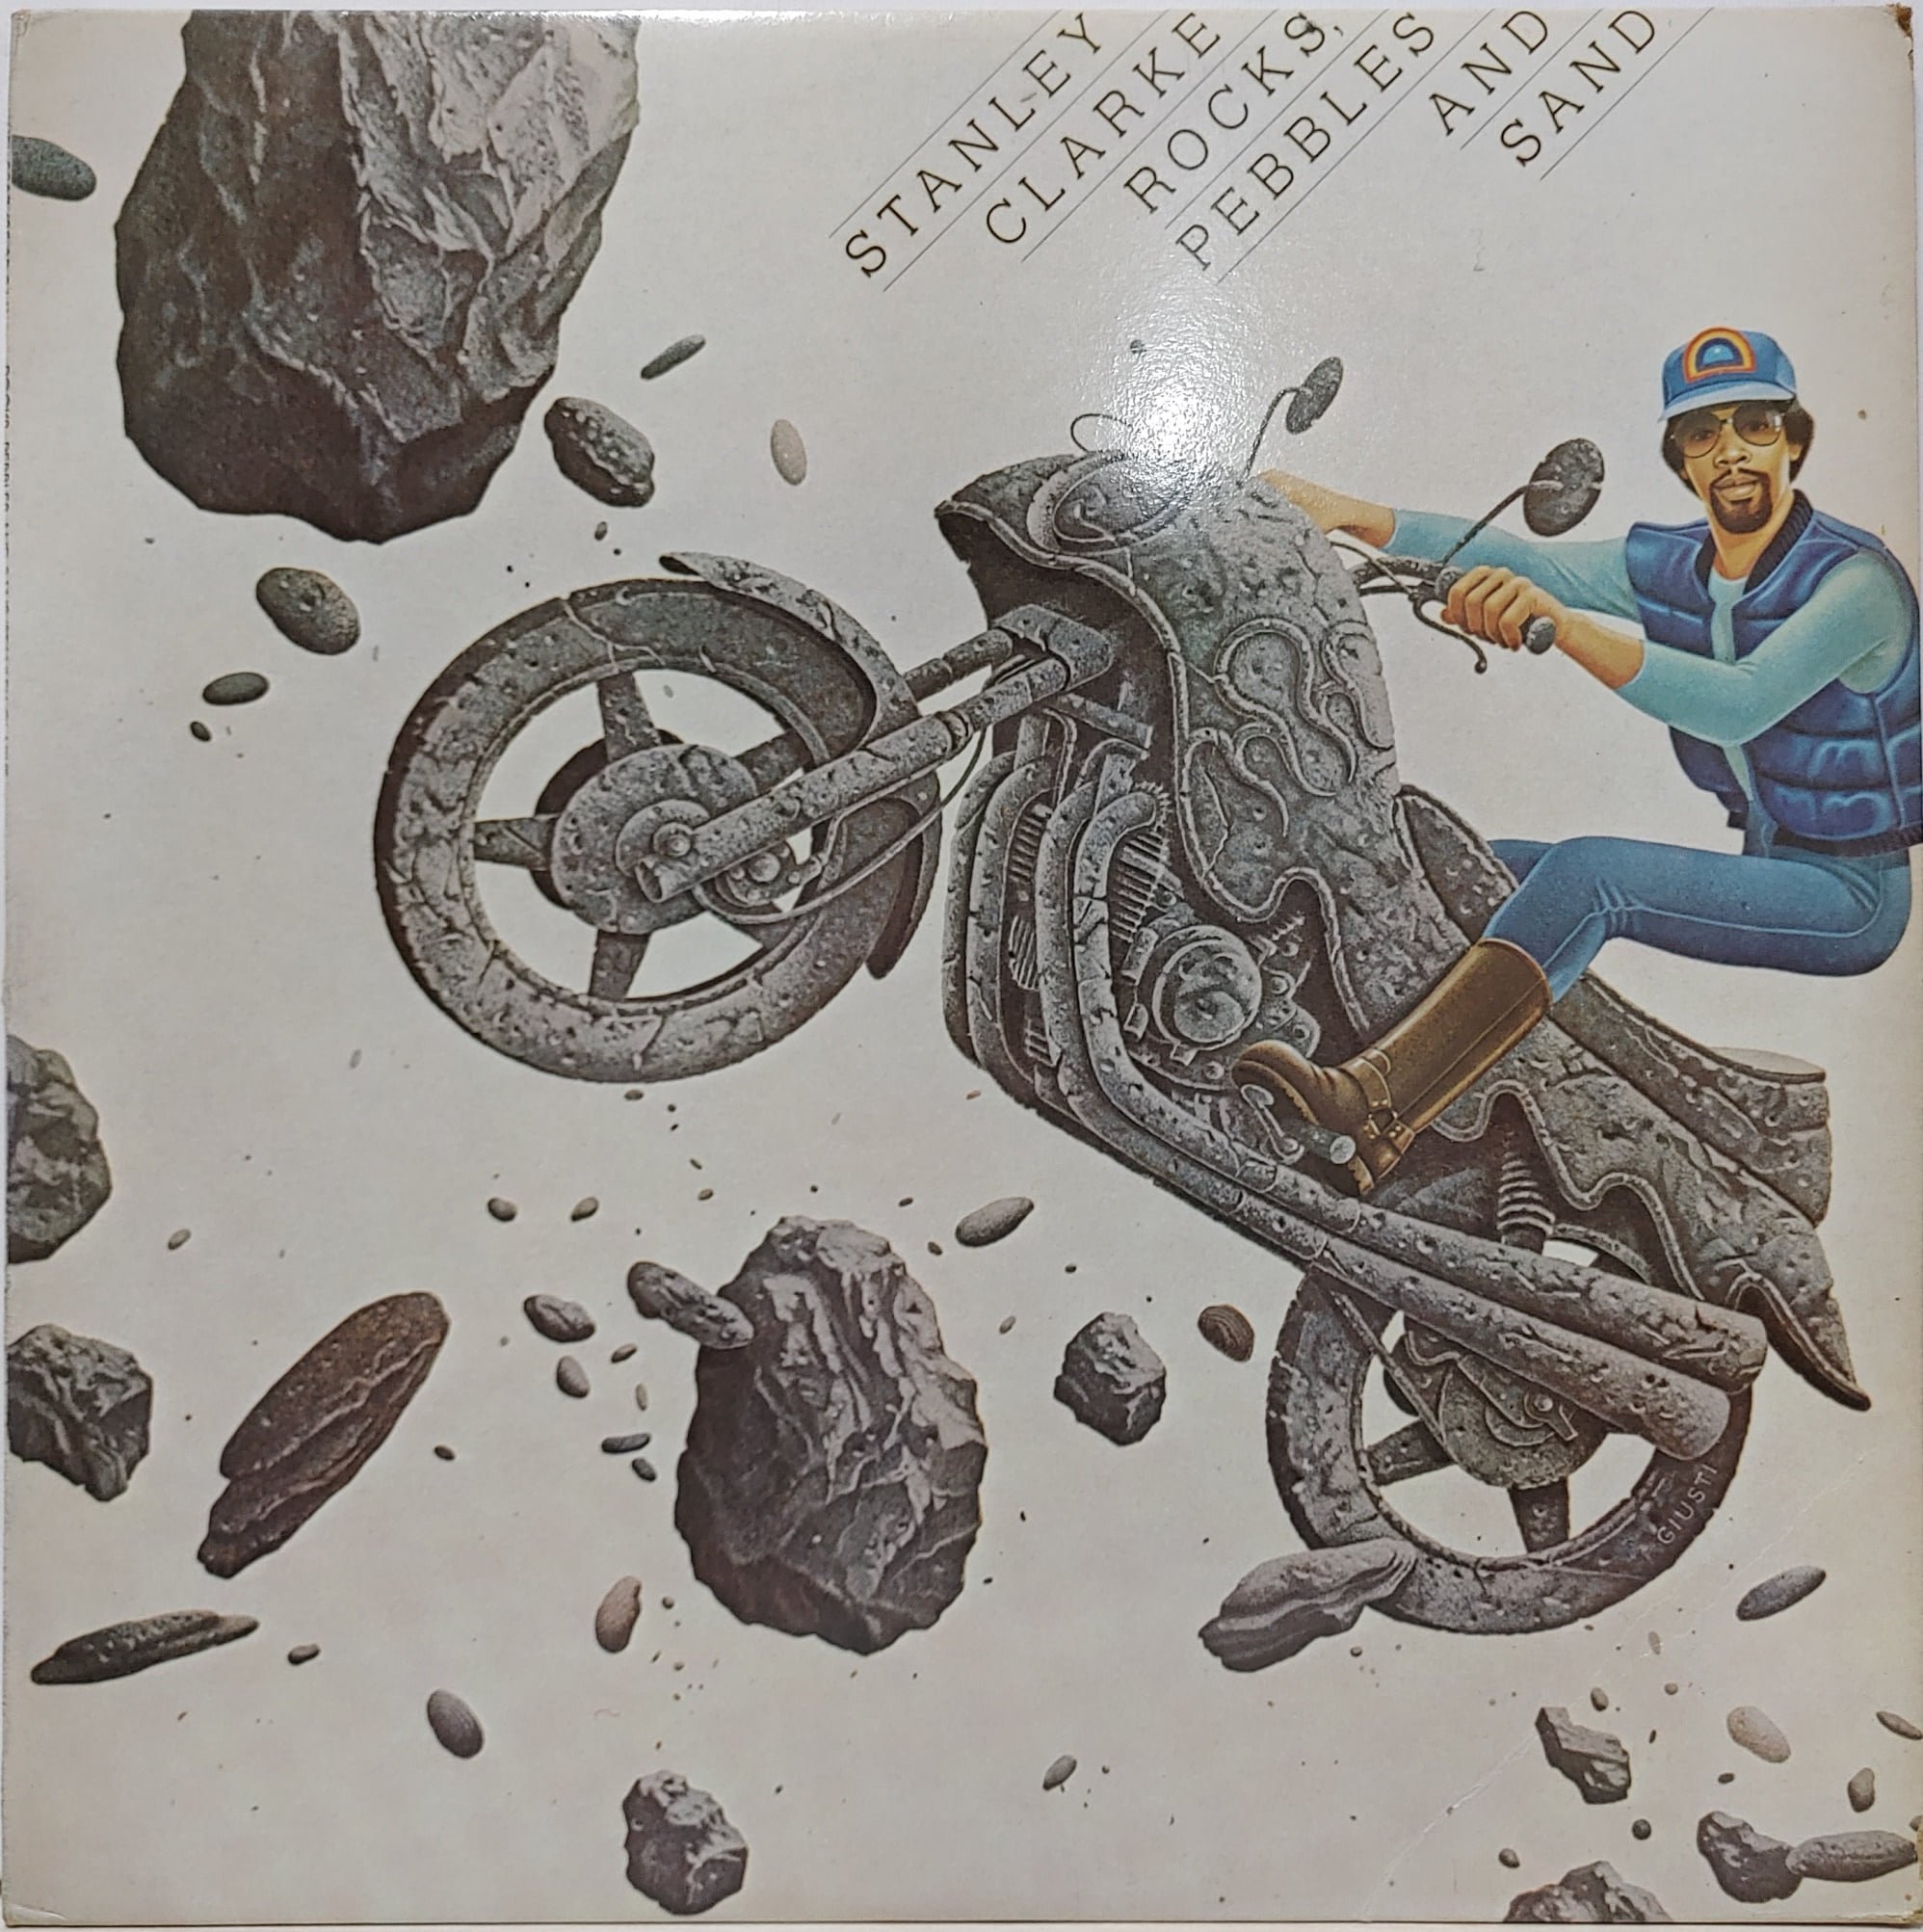 STANLEY CLARKE / ROCKS, PEBBLES AND SAND